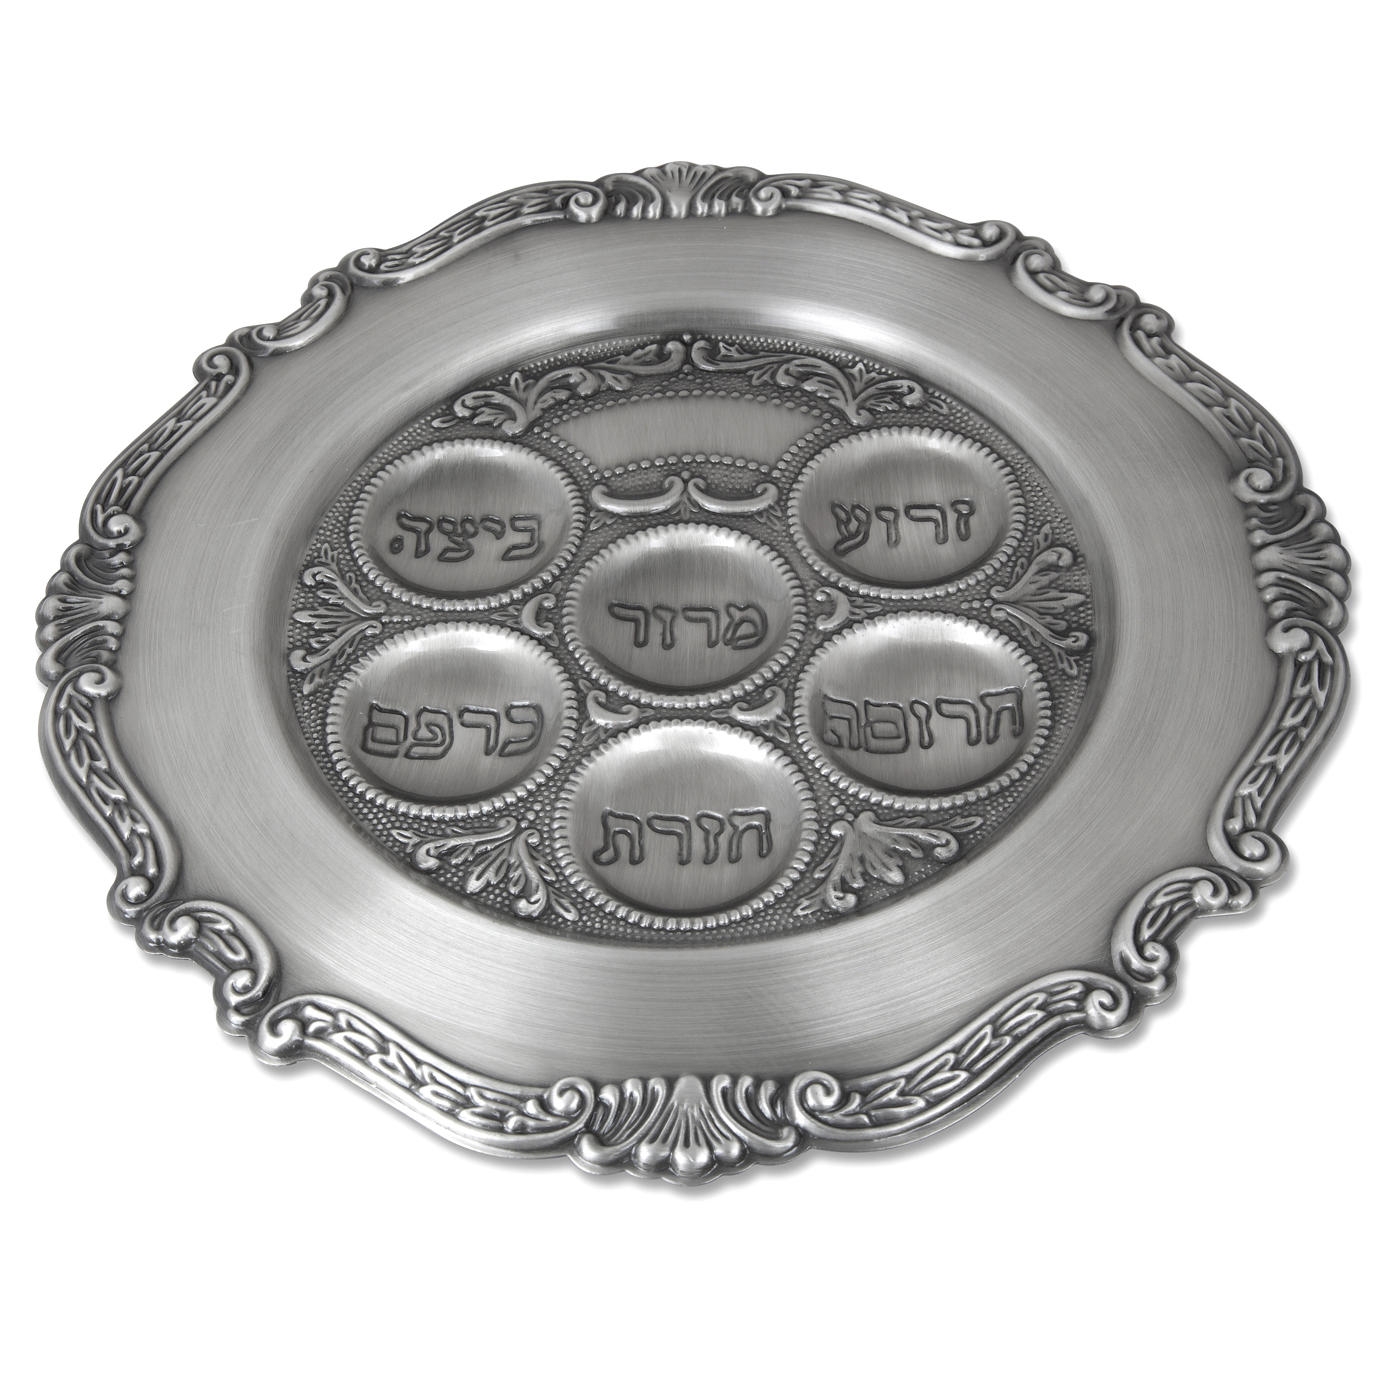 Pewter Seder Plate with Floral Border - 1